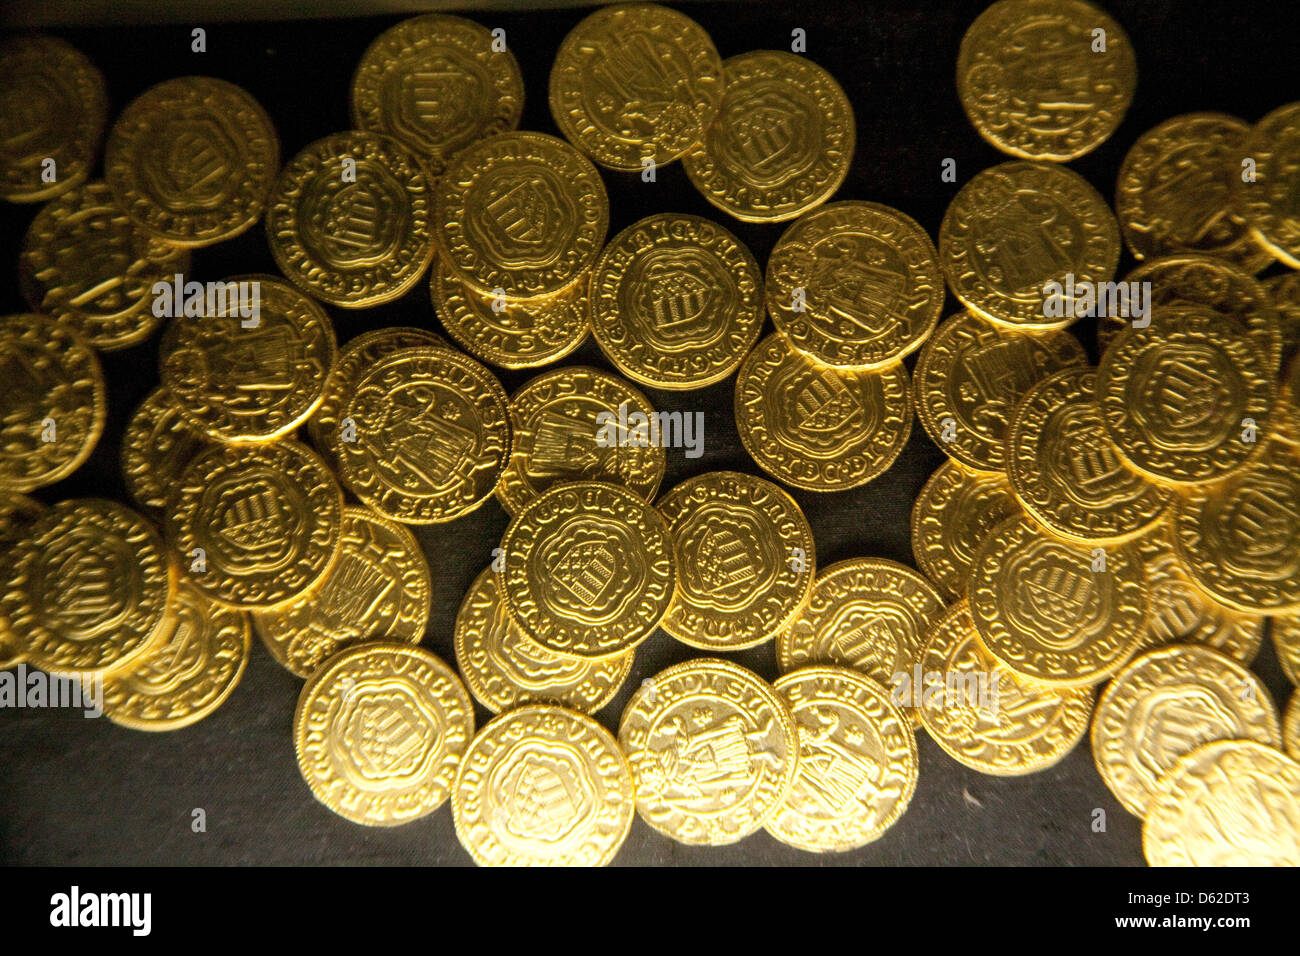 Gold coins found in the remains of a Jewish synagogue buried beneath the Old Town Square of Regensburg, Germany, UNESCO WHS Stock Photo